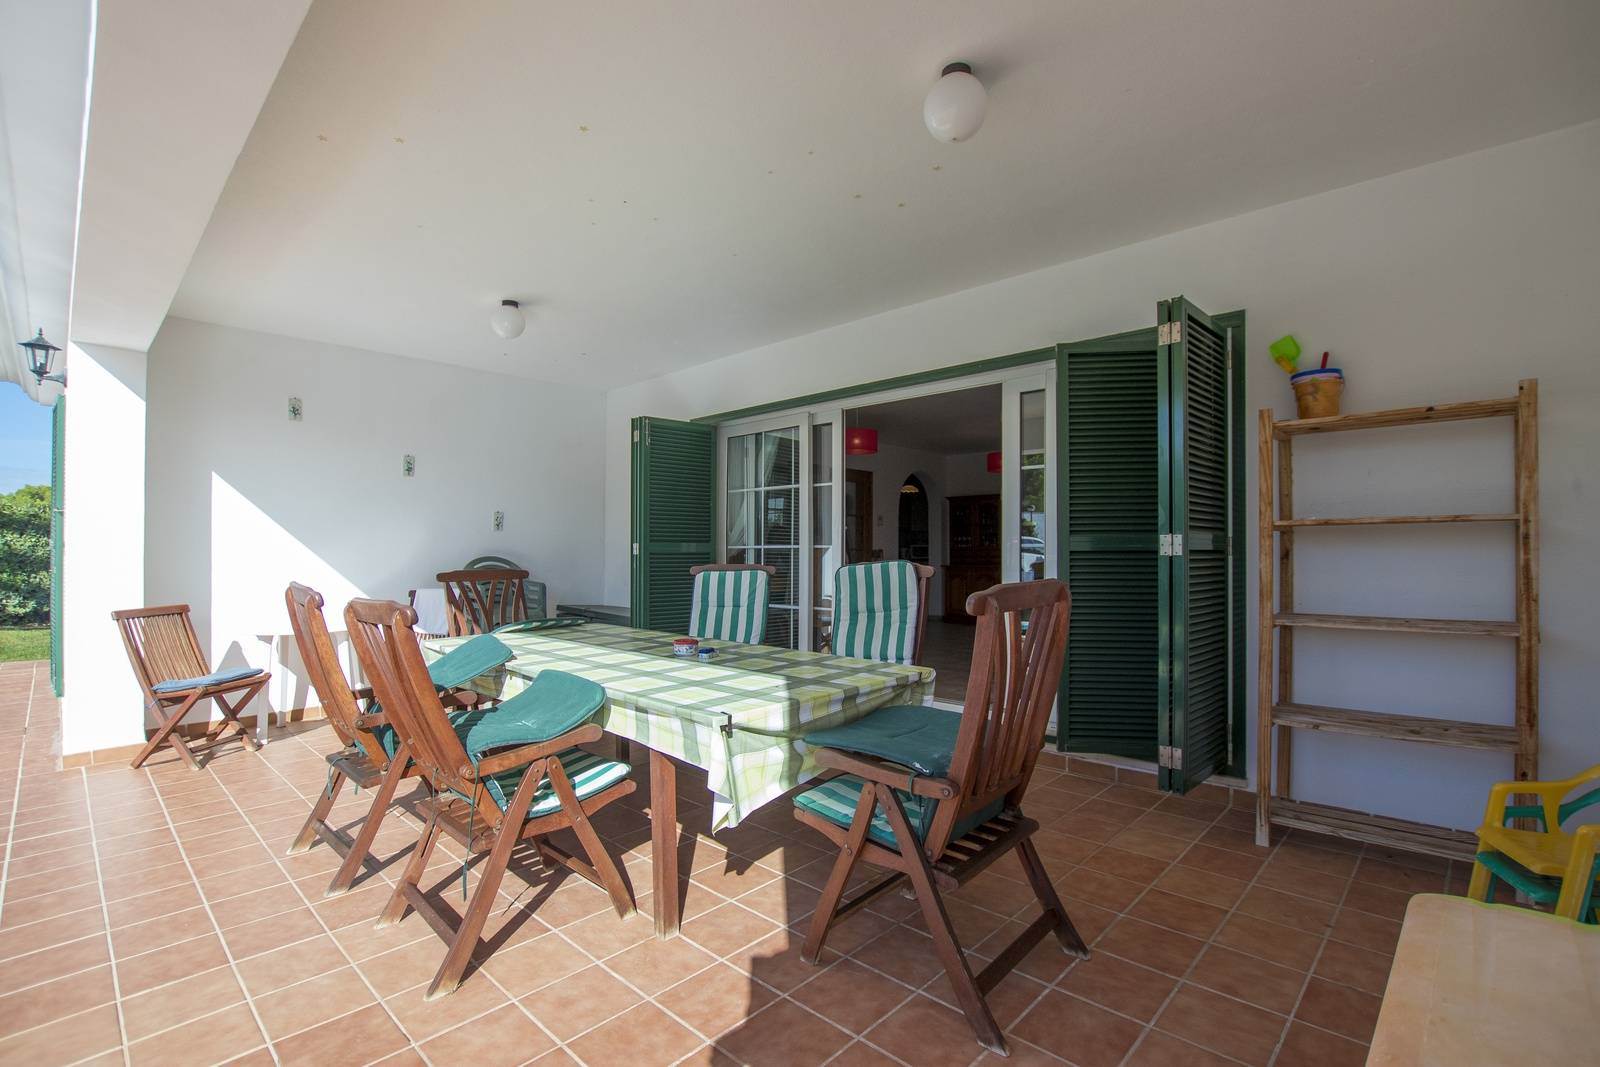 Lovely Villa for sale in Menorca with walking distance to a sandy beach in Arenal